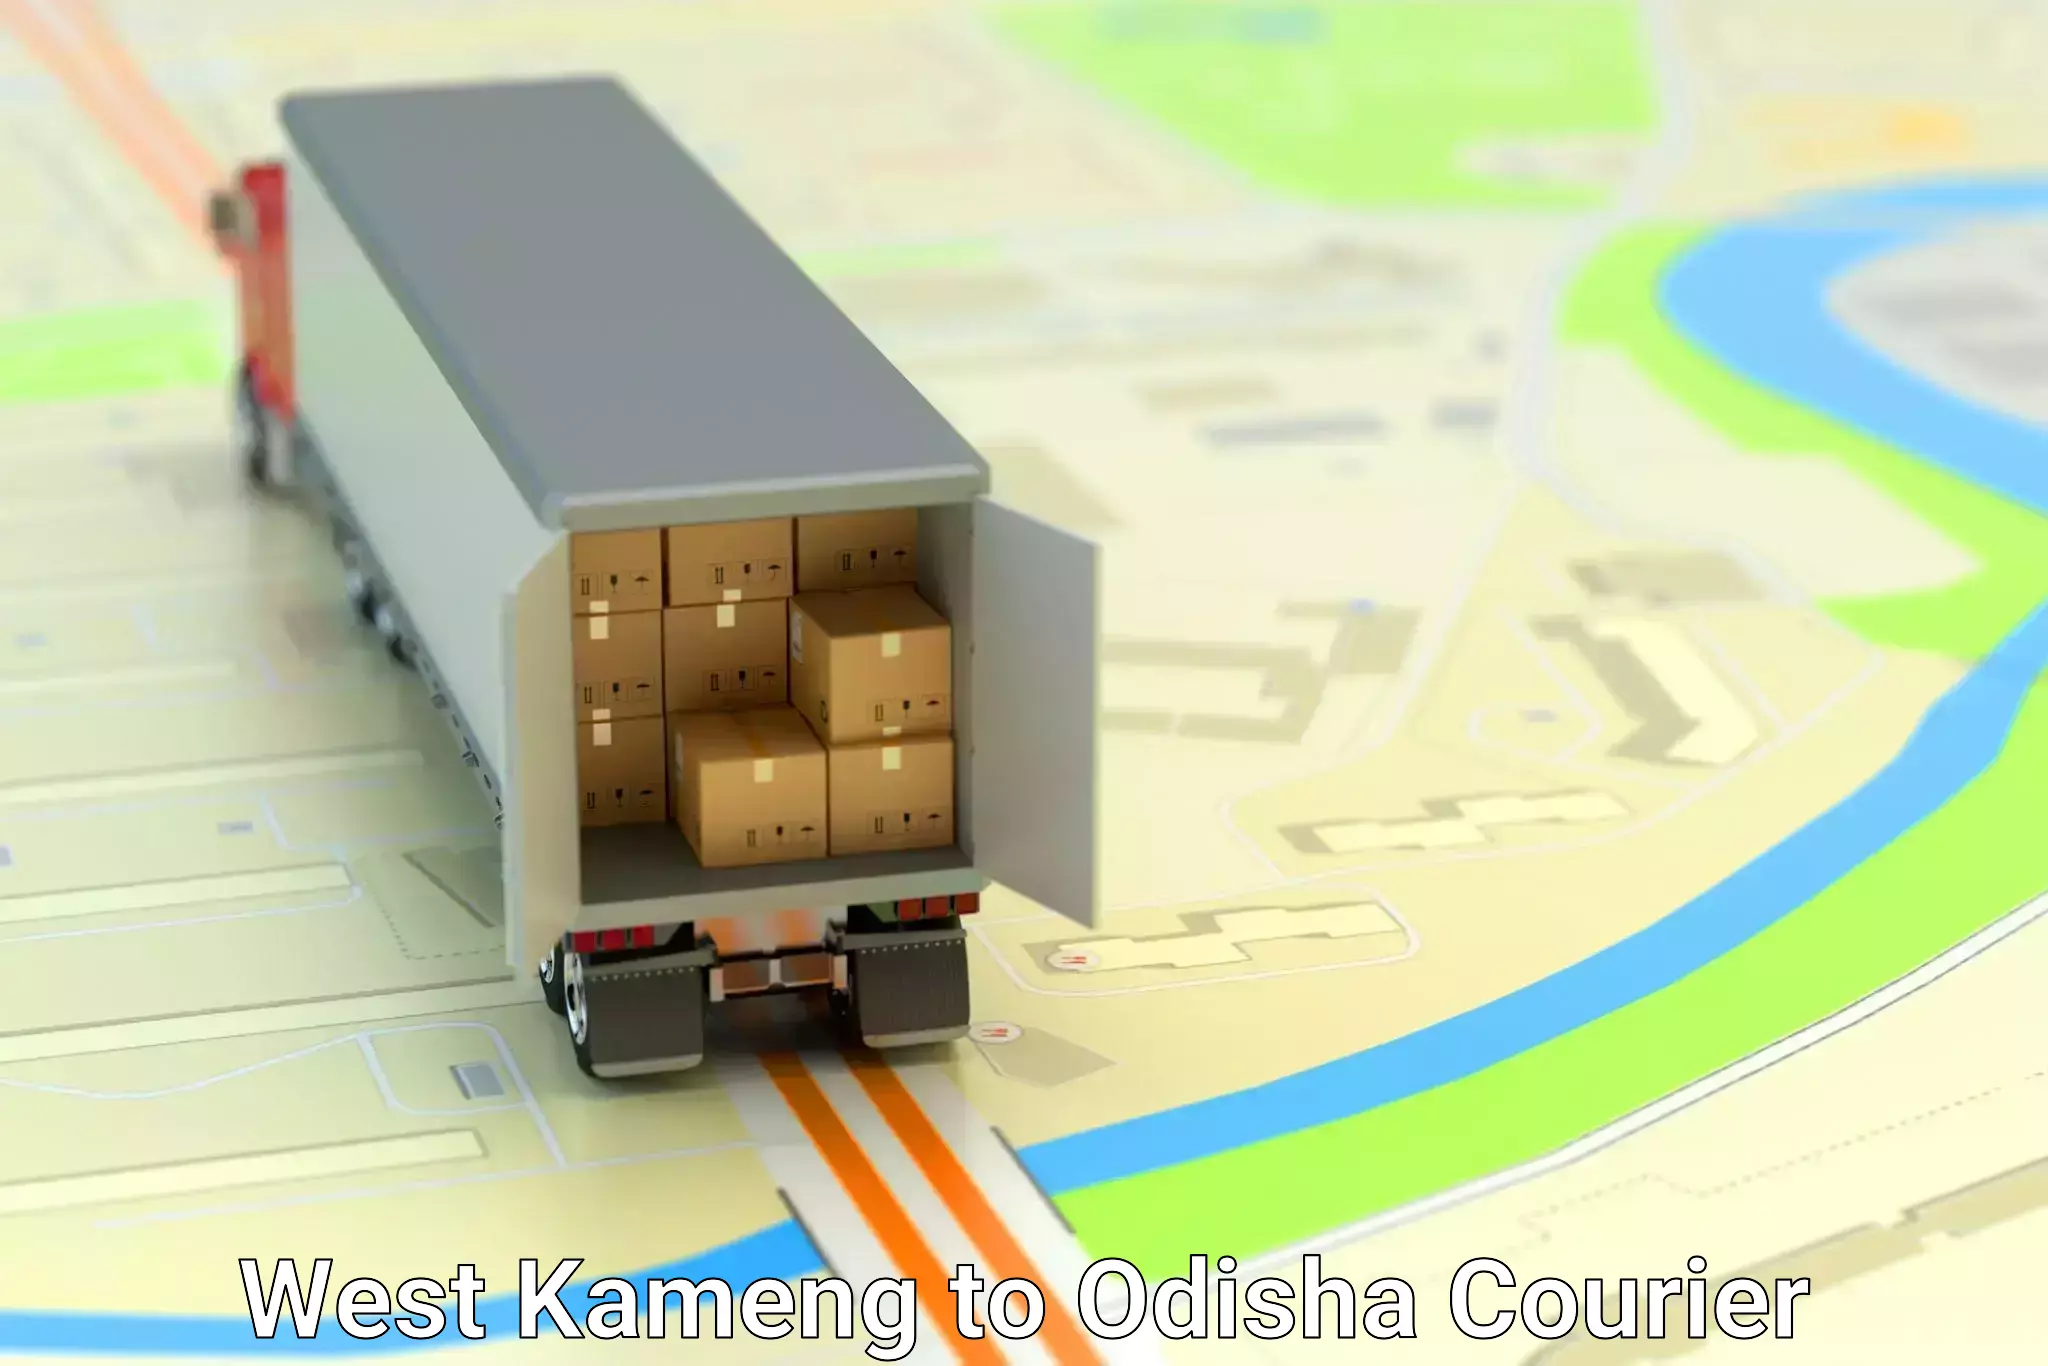 Express delivery capabilities in West Kameng to Odisha